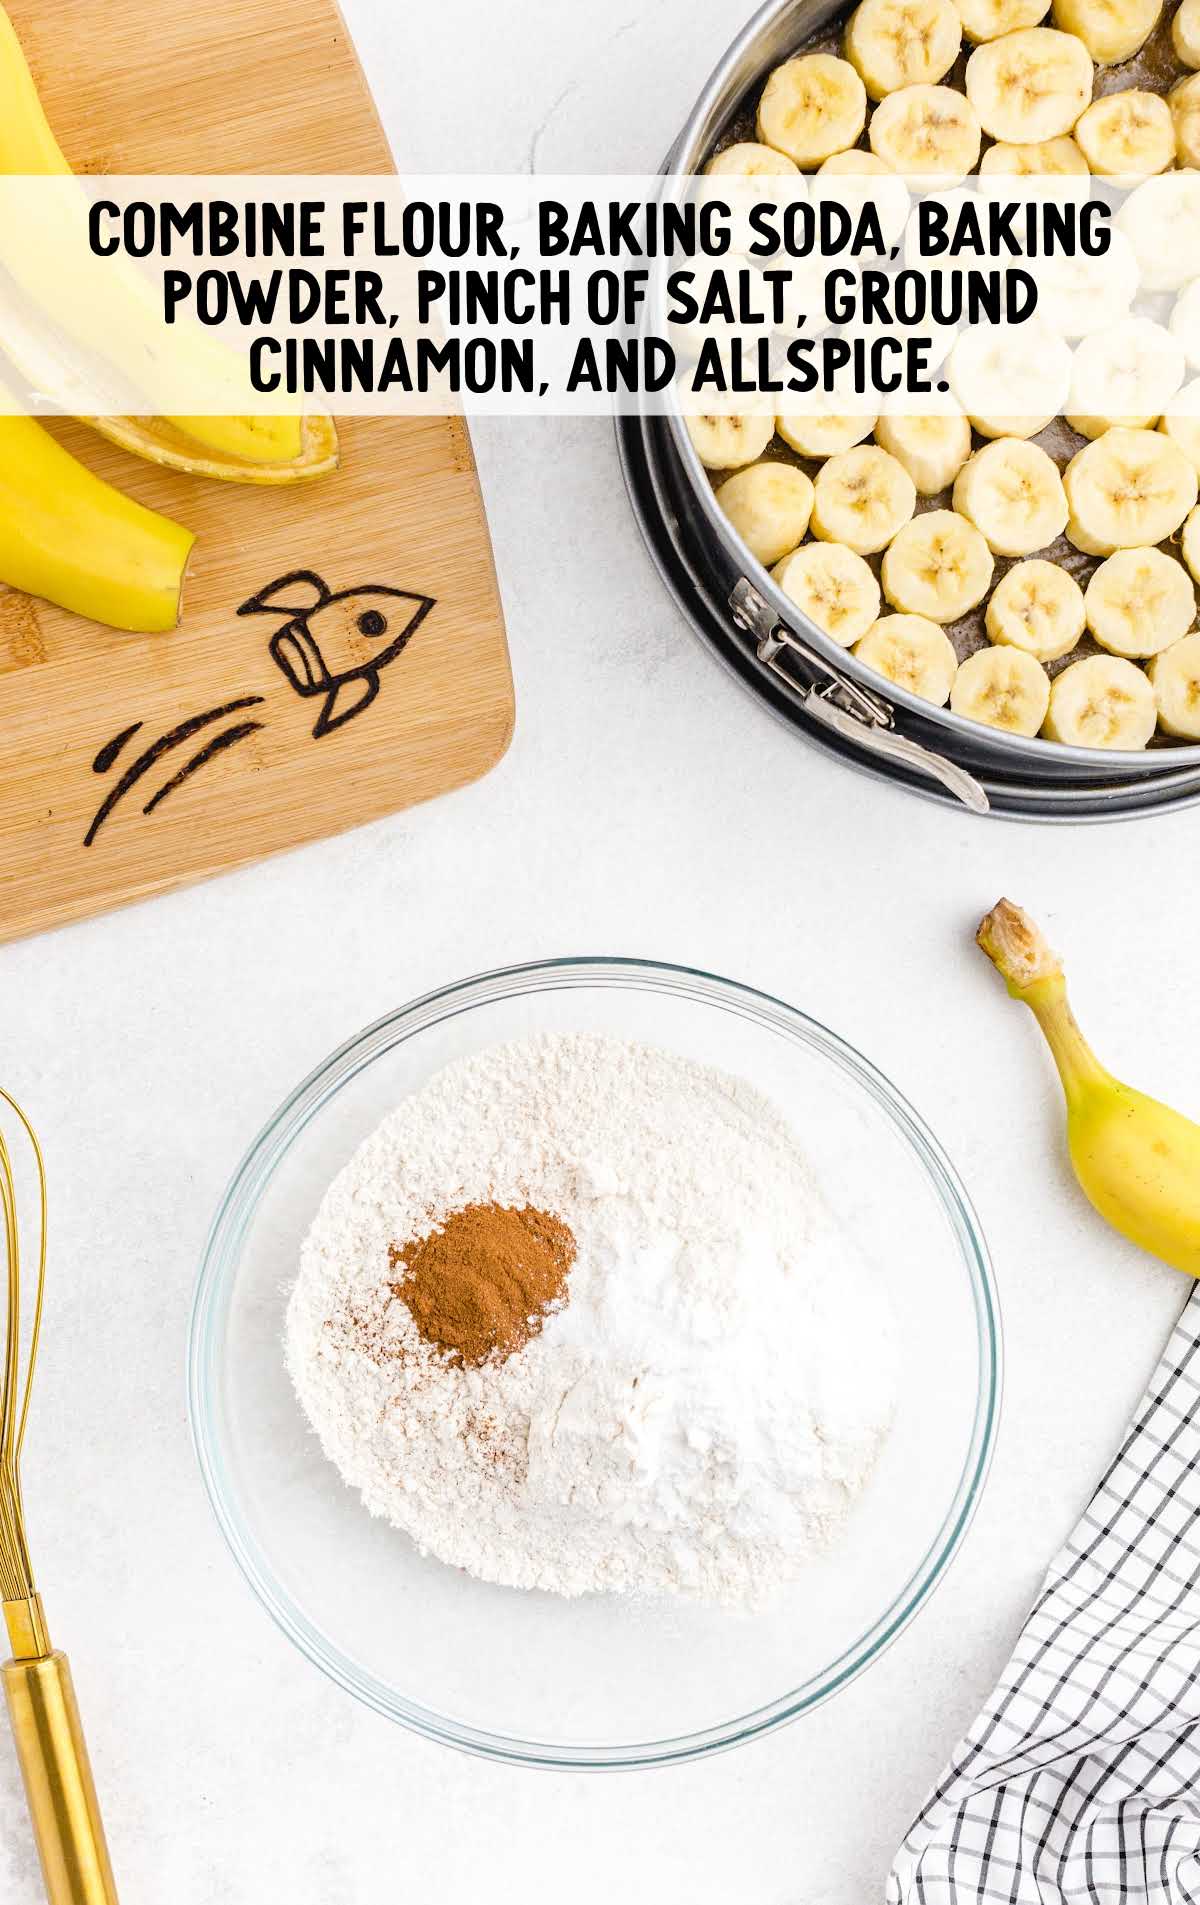 flour, baking soda, baking powder, pinch of salt, grounded cinnamon, and allspice combined in a bowl